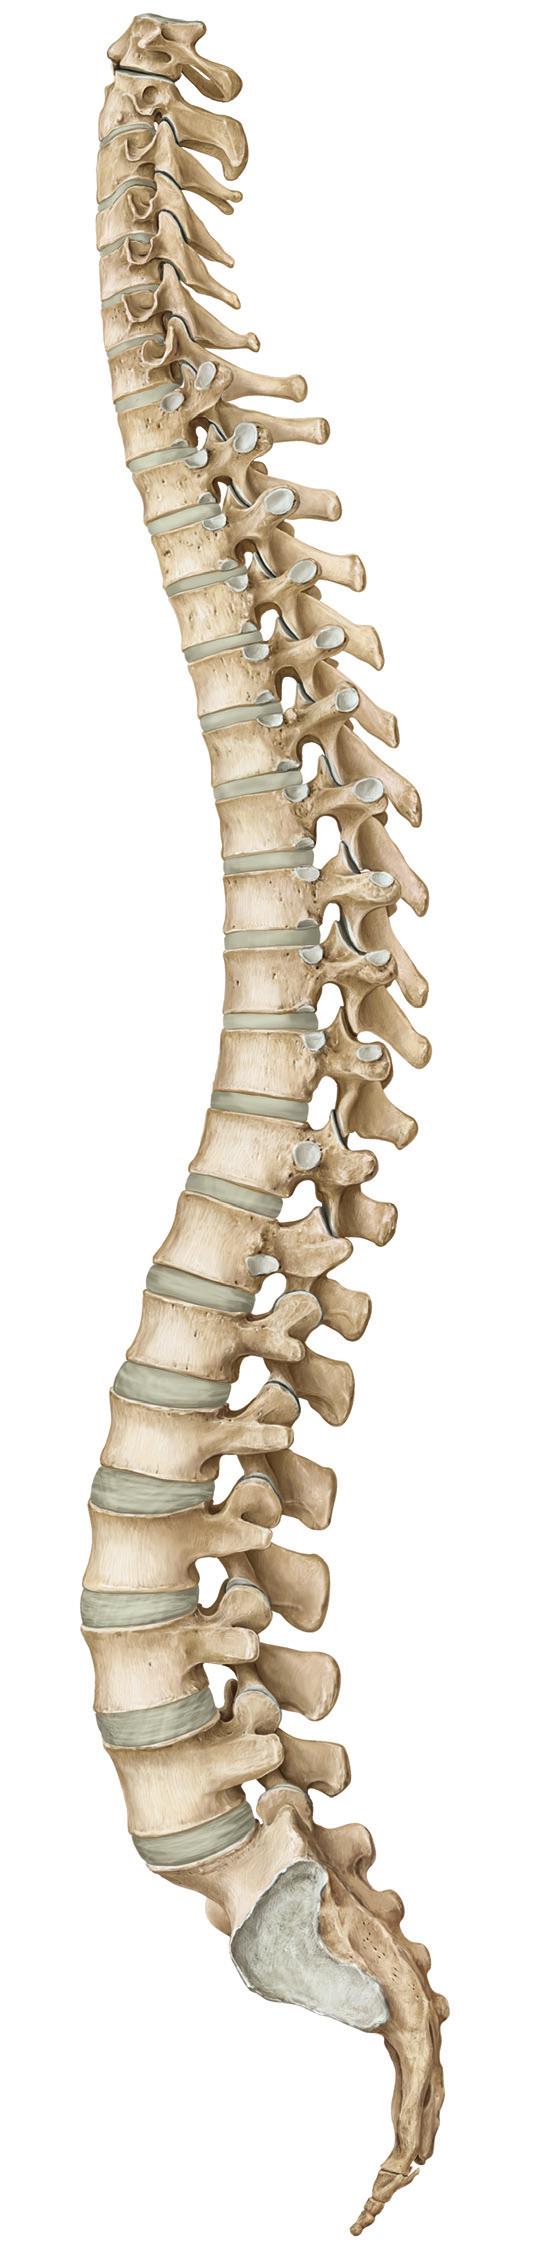 interspersed with fibrocartilaginous intervertebral discs, forming a strong and flexible support for the neck and trunk (Figure.3).